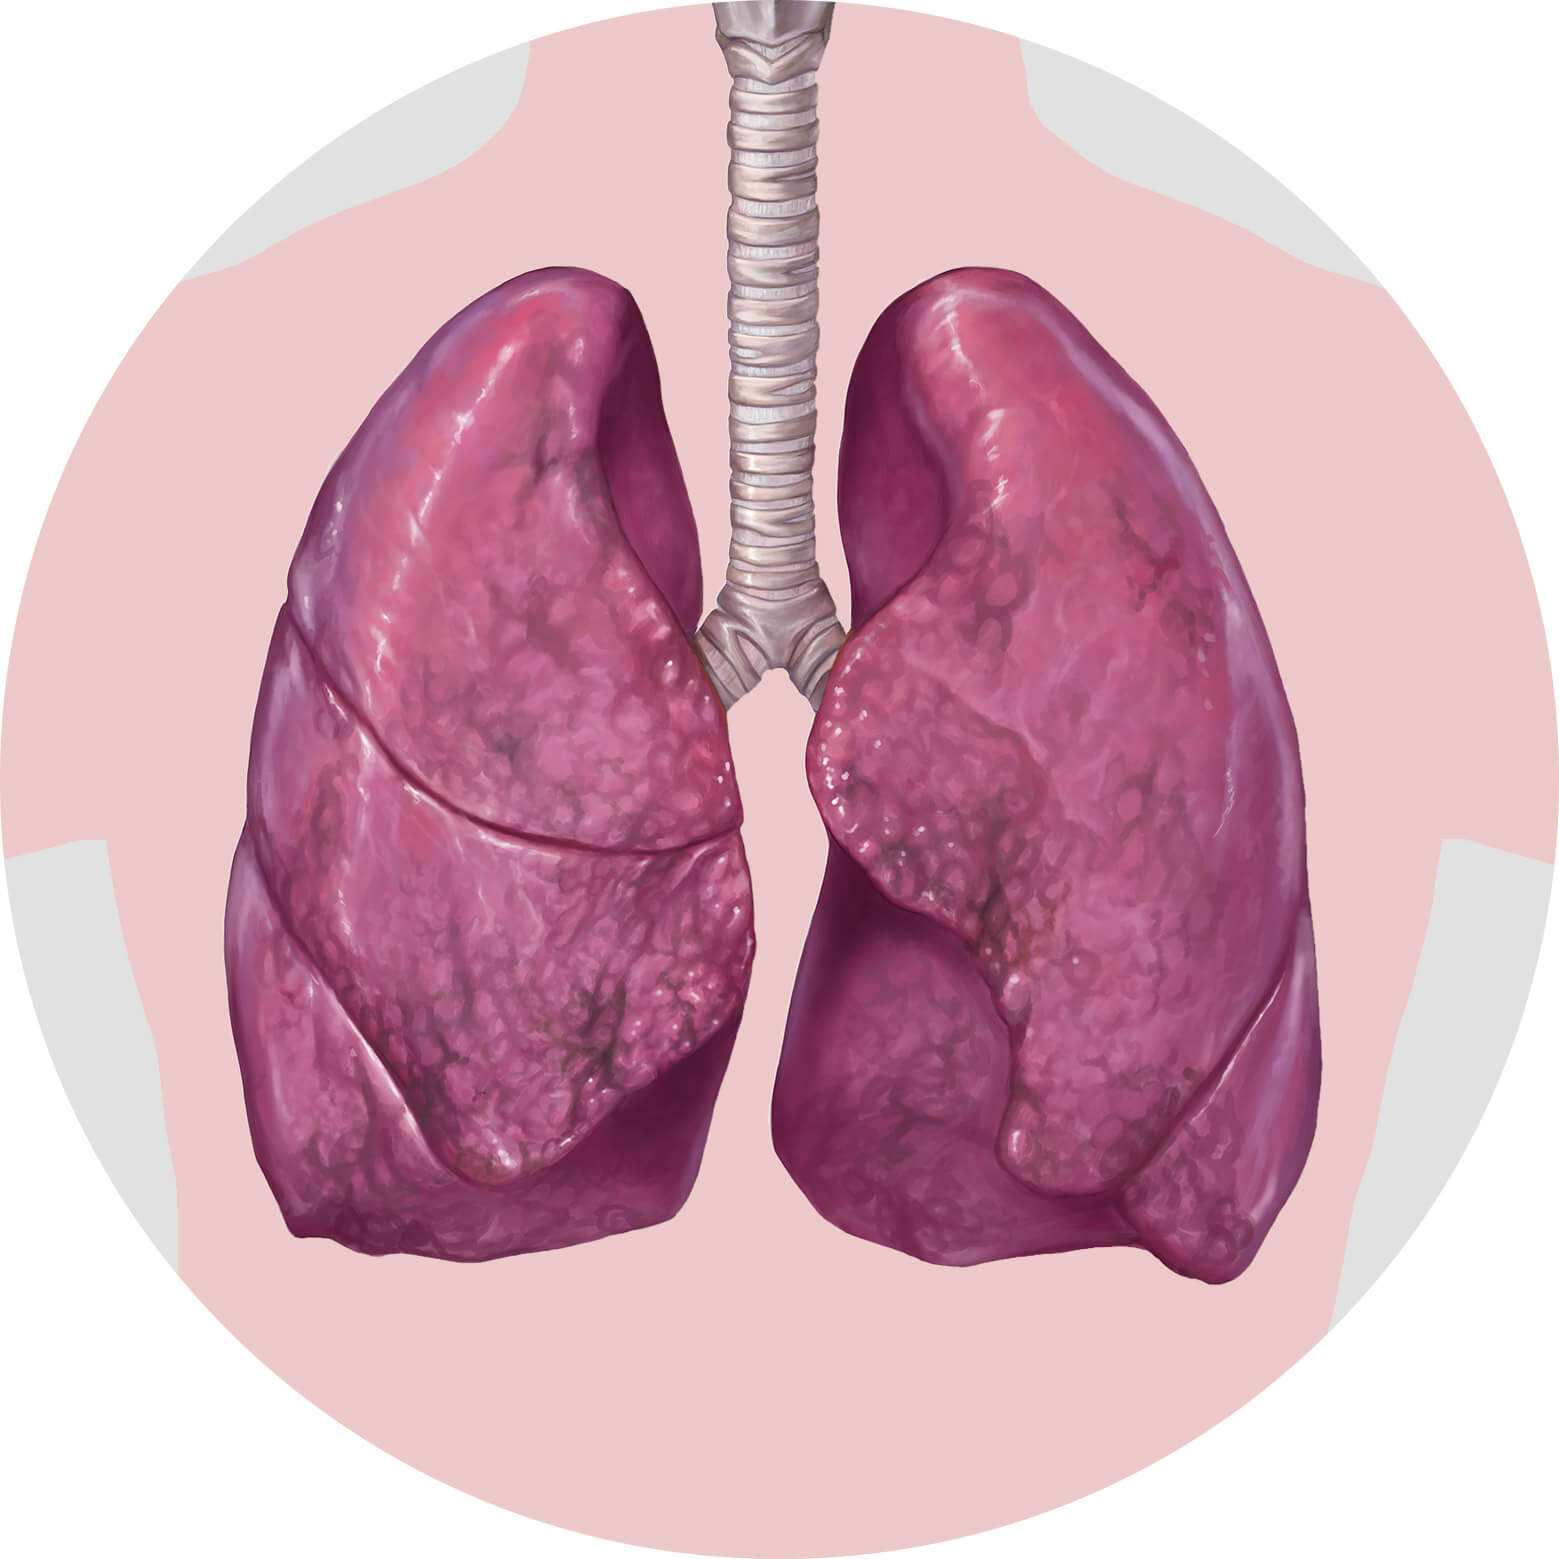 Lungs with ILD Scarring